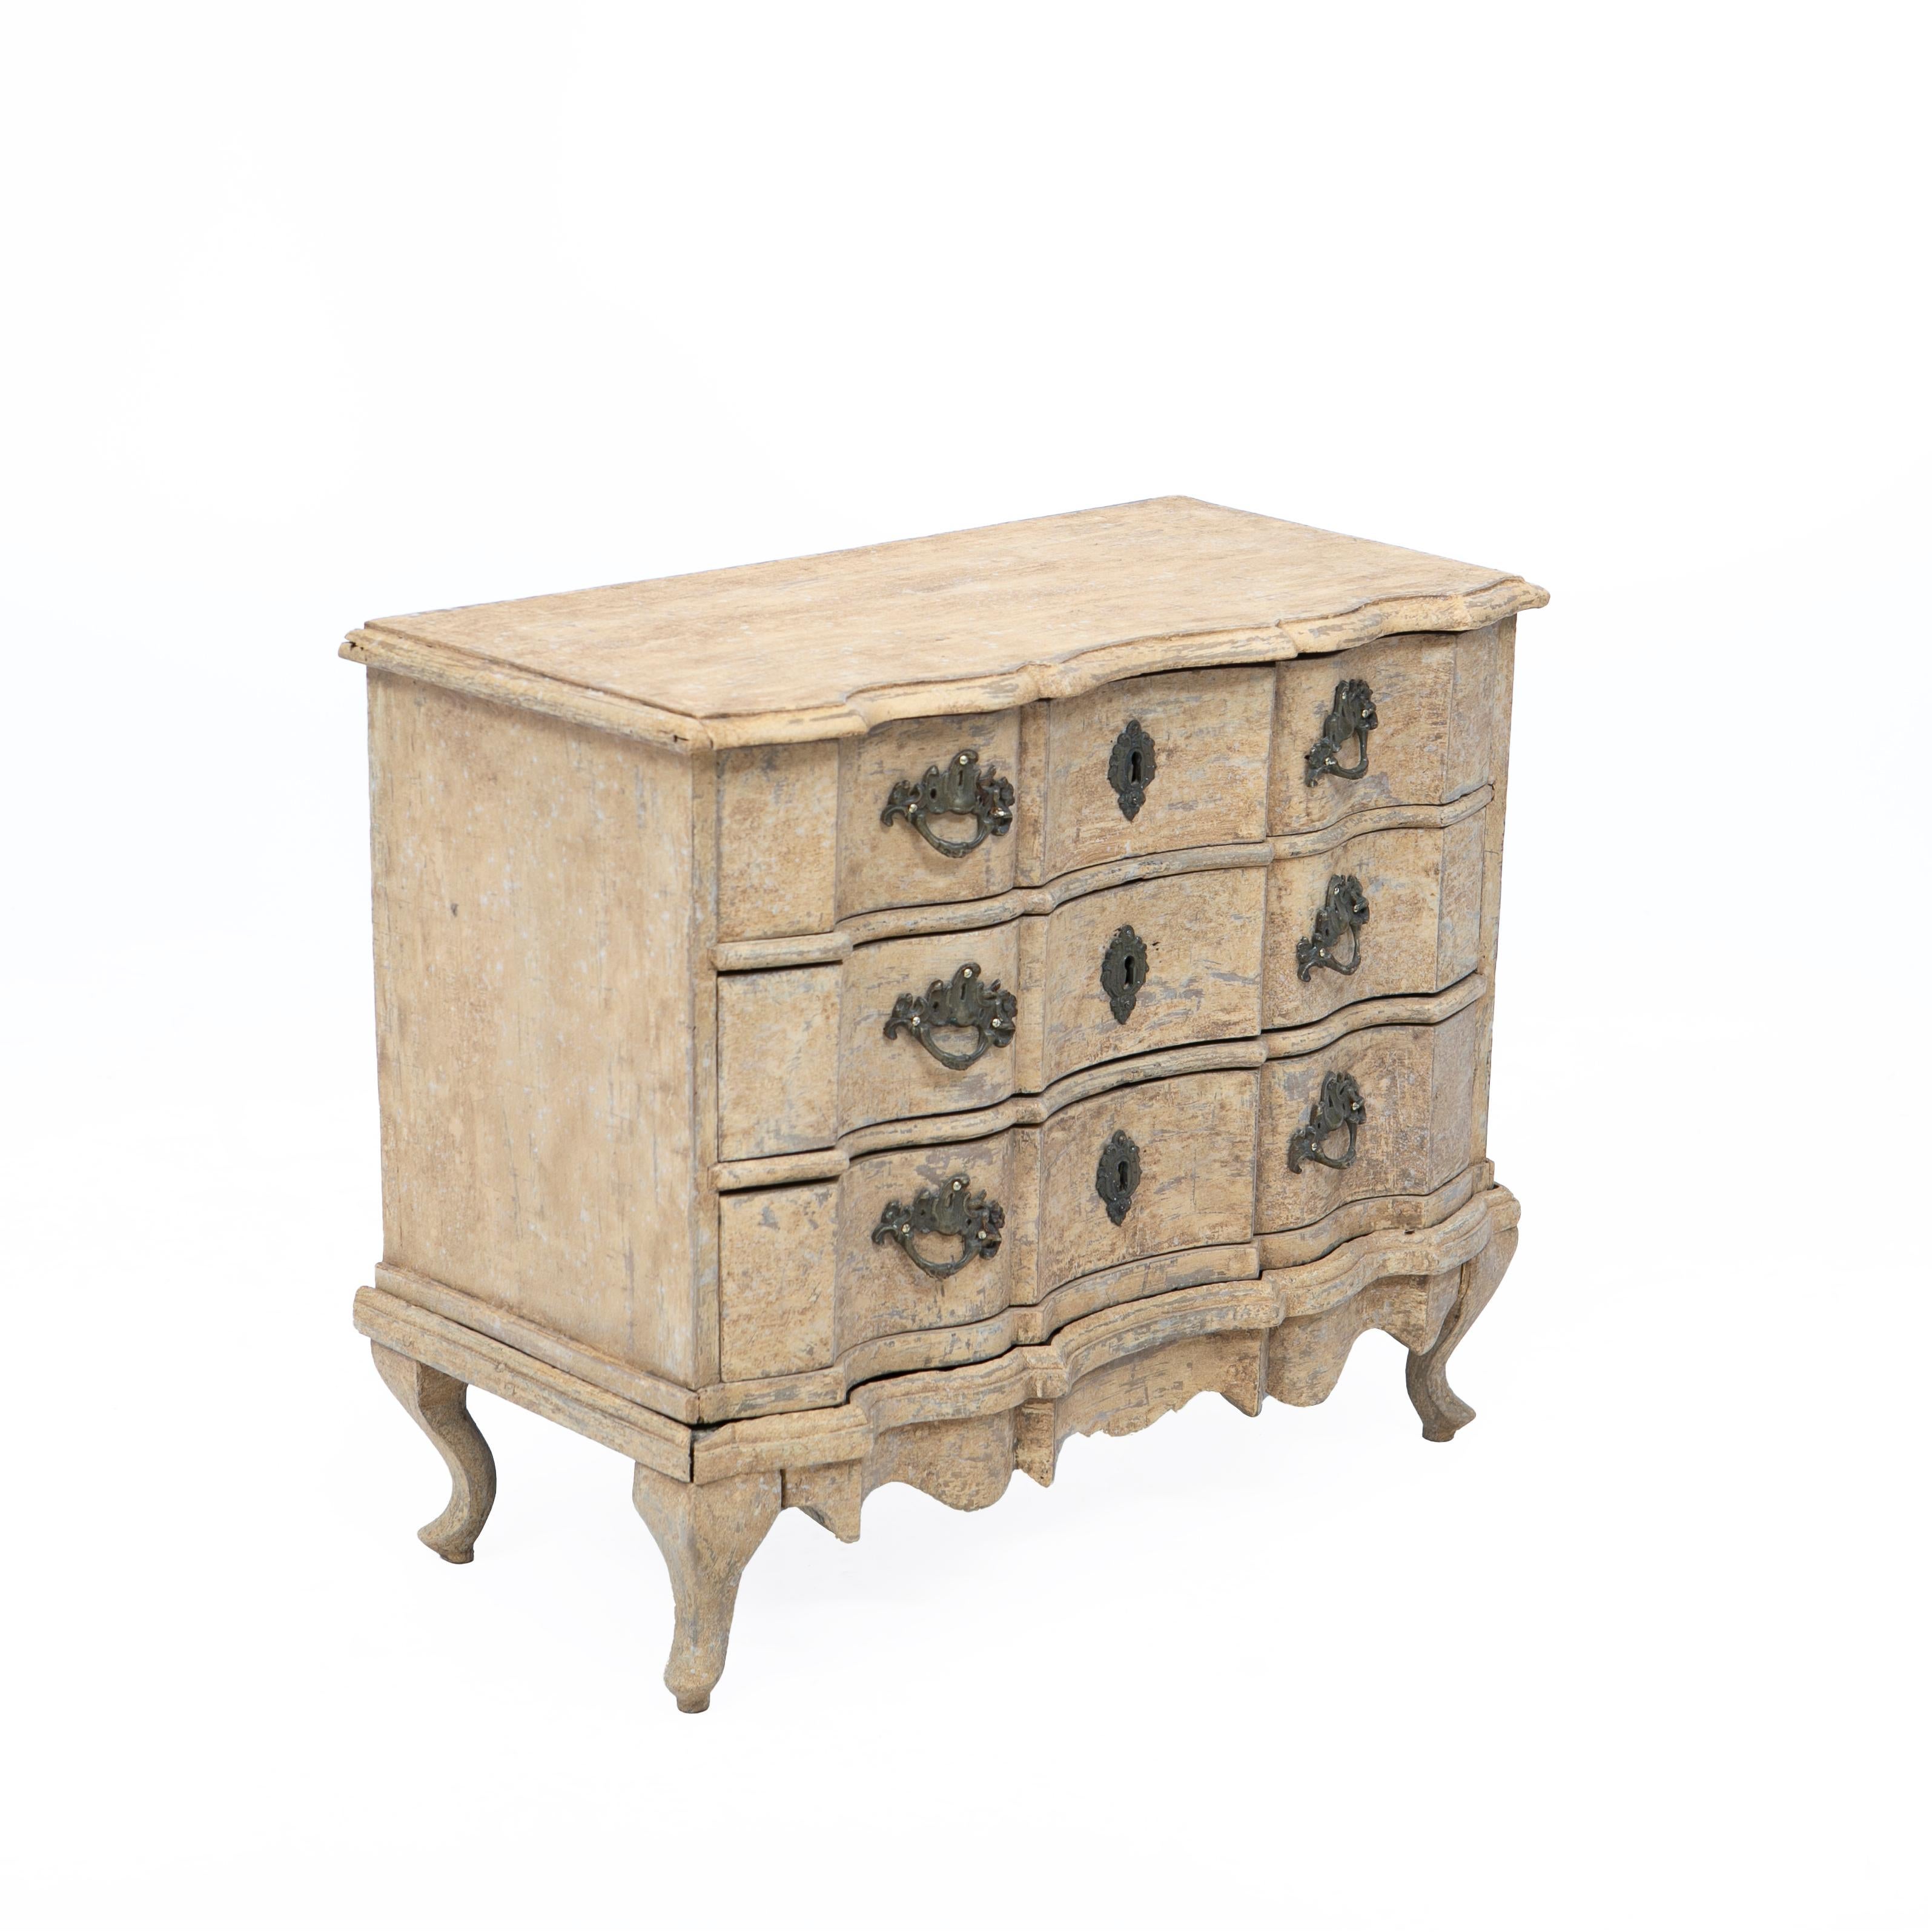 Small Danish rococo breakfront chest of three drawers.

Crafted in oak wood and later professional painted in a light ocher yellow with a lovely patina.

Denmark 1750-1760